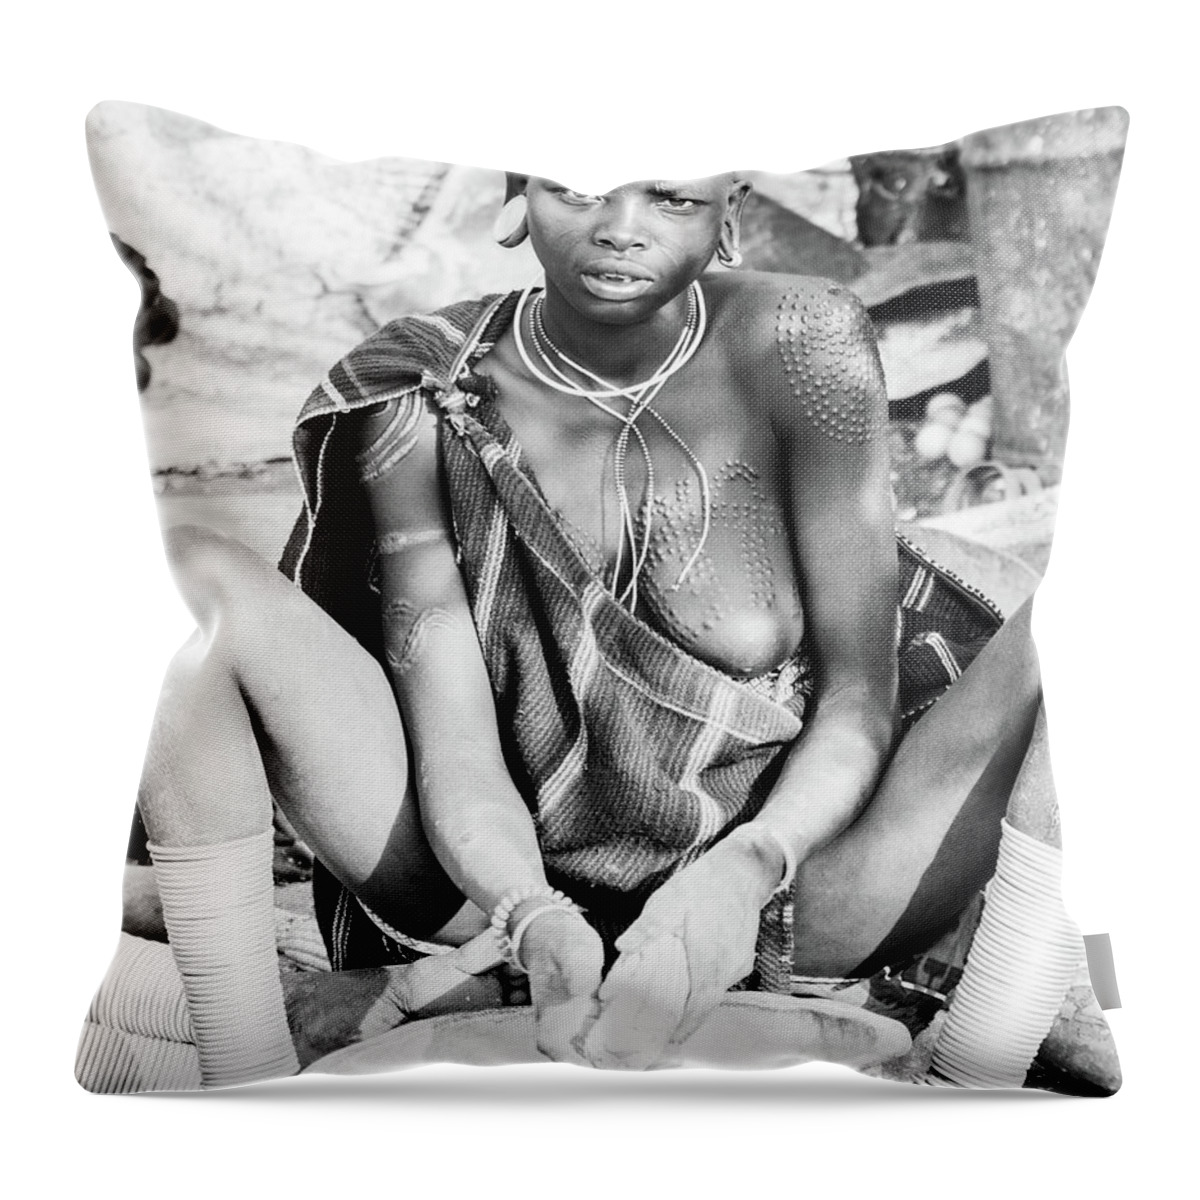 Tribe Throw Pillow featuring the photograph Suri girl by Mache Del Campo